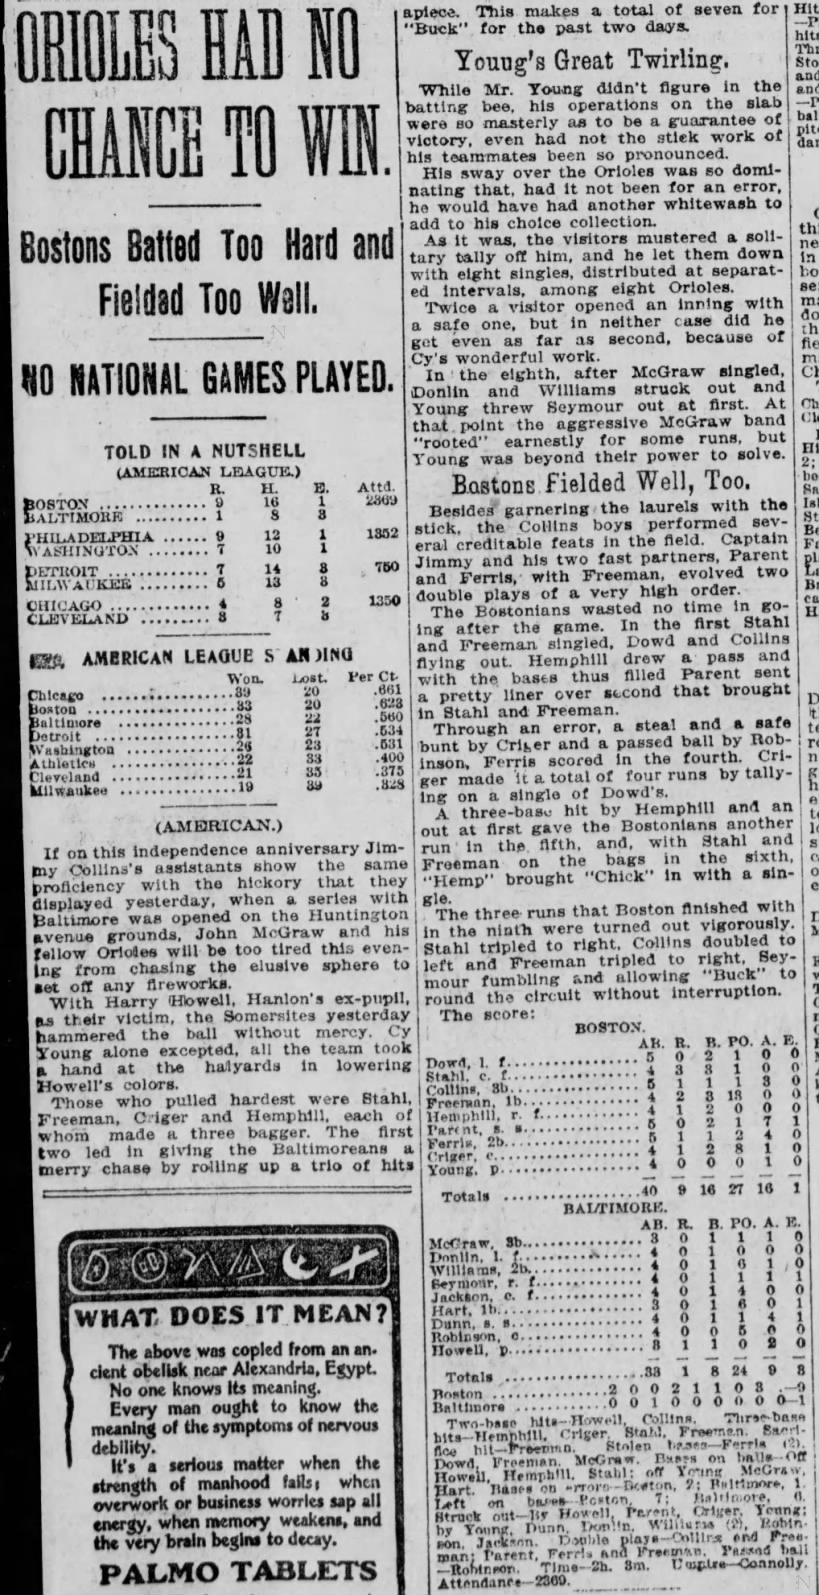 July 3, 1901
Cy Young's 300th Win